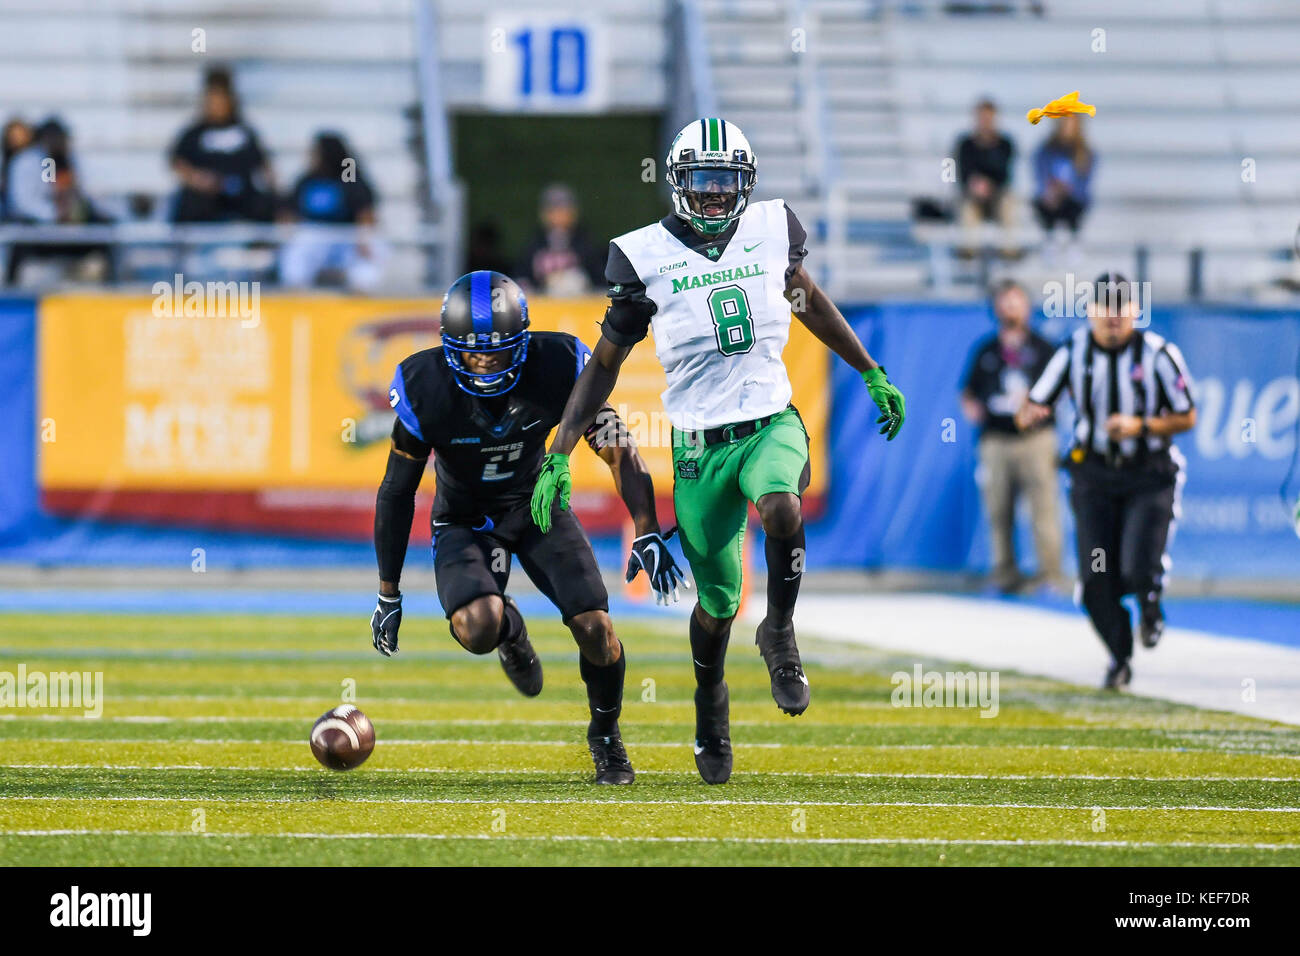 Nashville. 20th Oct, 2017. MTSU cornerback Charvarius Ward (2) draws a flag on Marshall wide receiver Tyre Brady (8) during the game between Marshall Thundering Herd and MTSU Blue Raiders at Johnny ''Red'' Floyd Stadium in Nashville. TN. Thomas McEwen/CSM/Alamy Live News Stock Photo